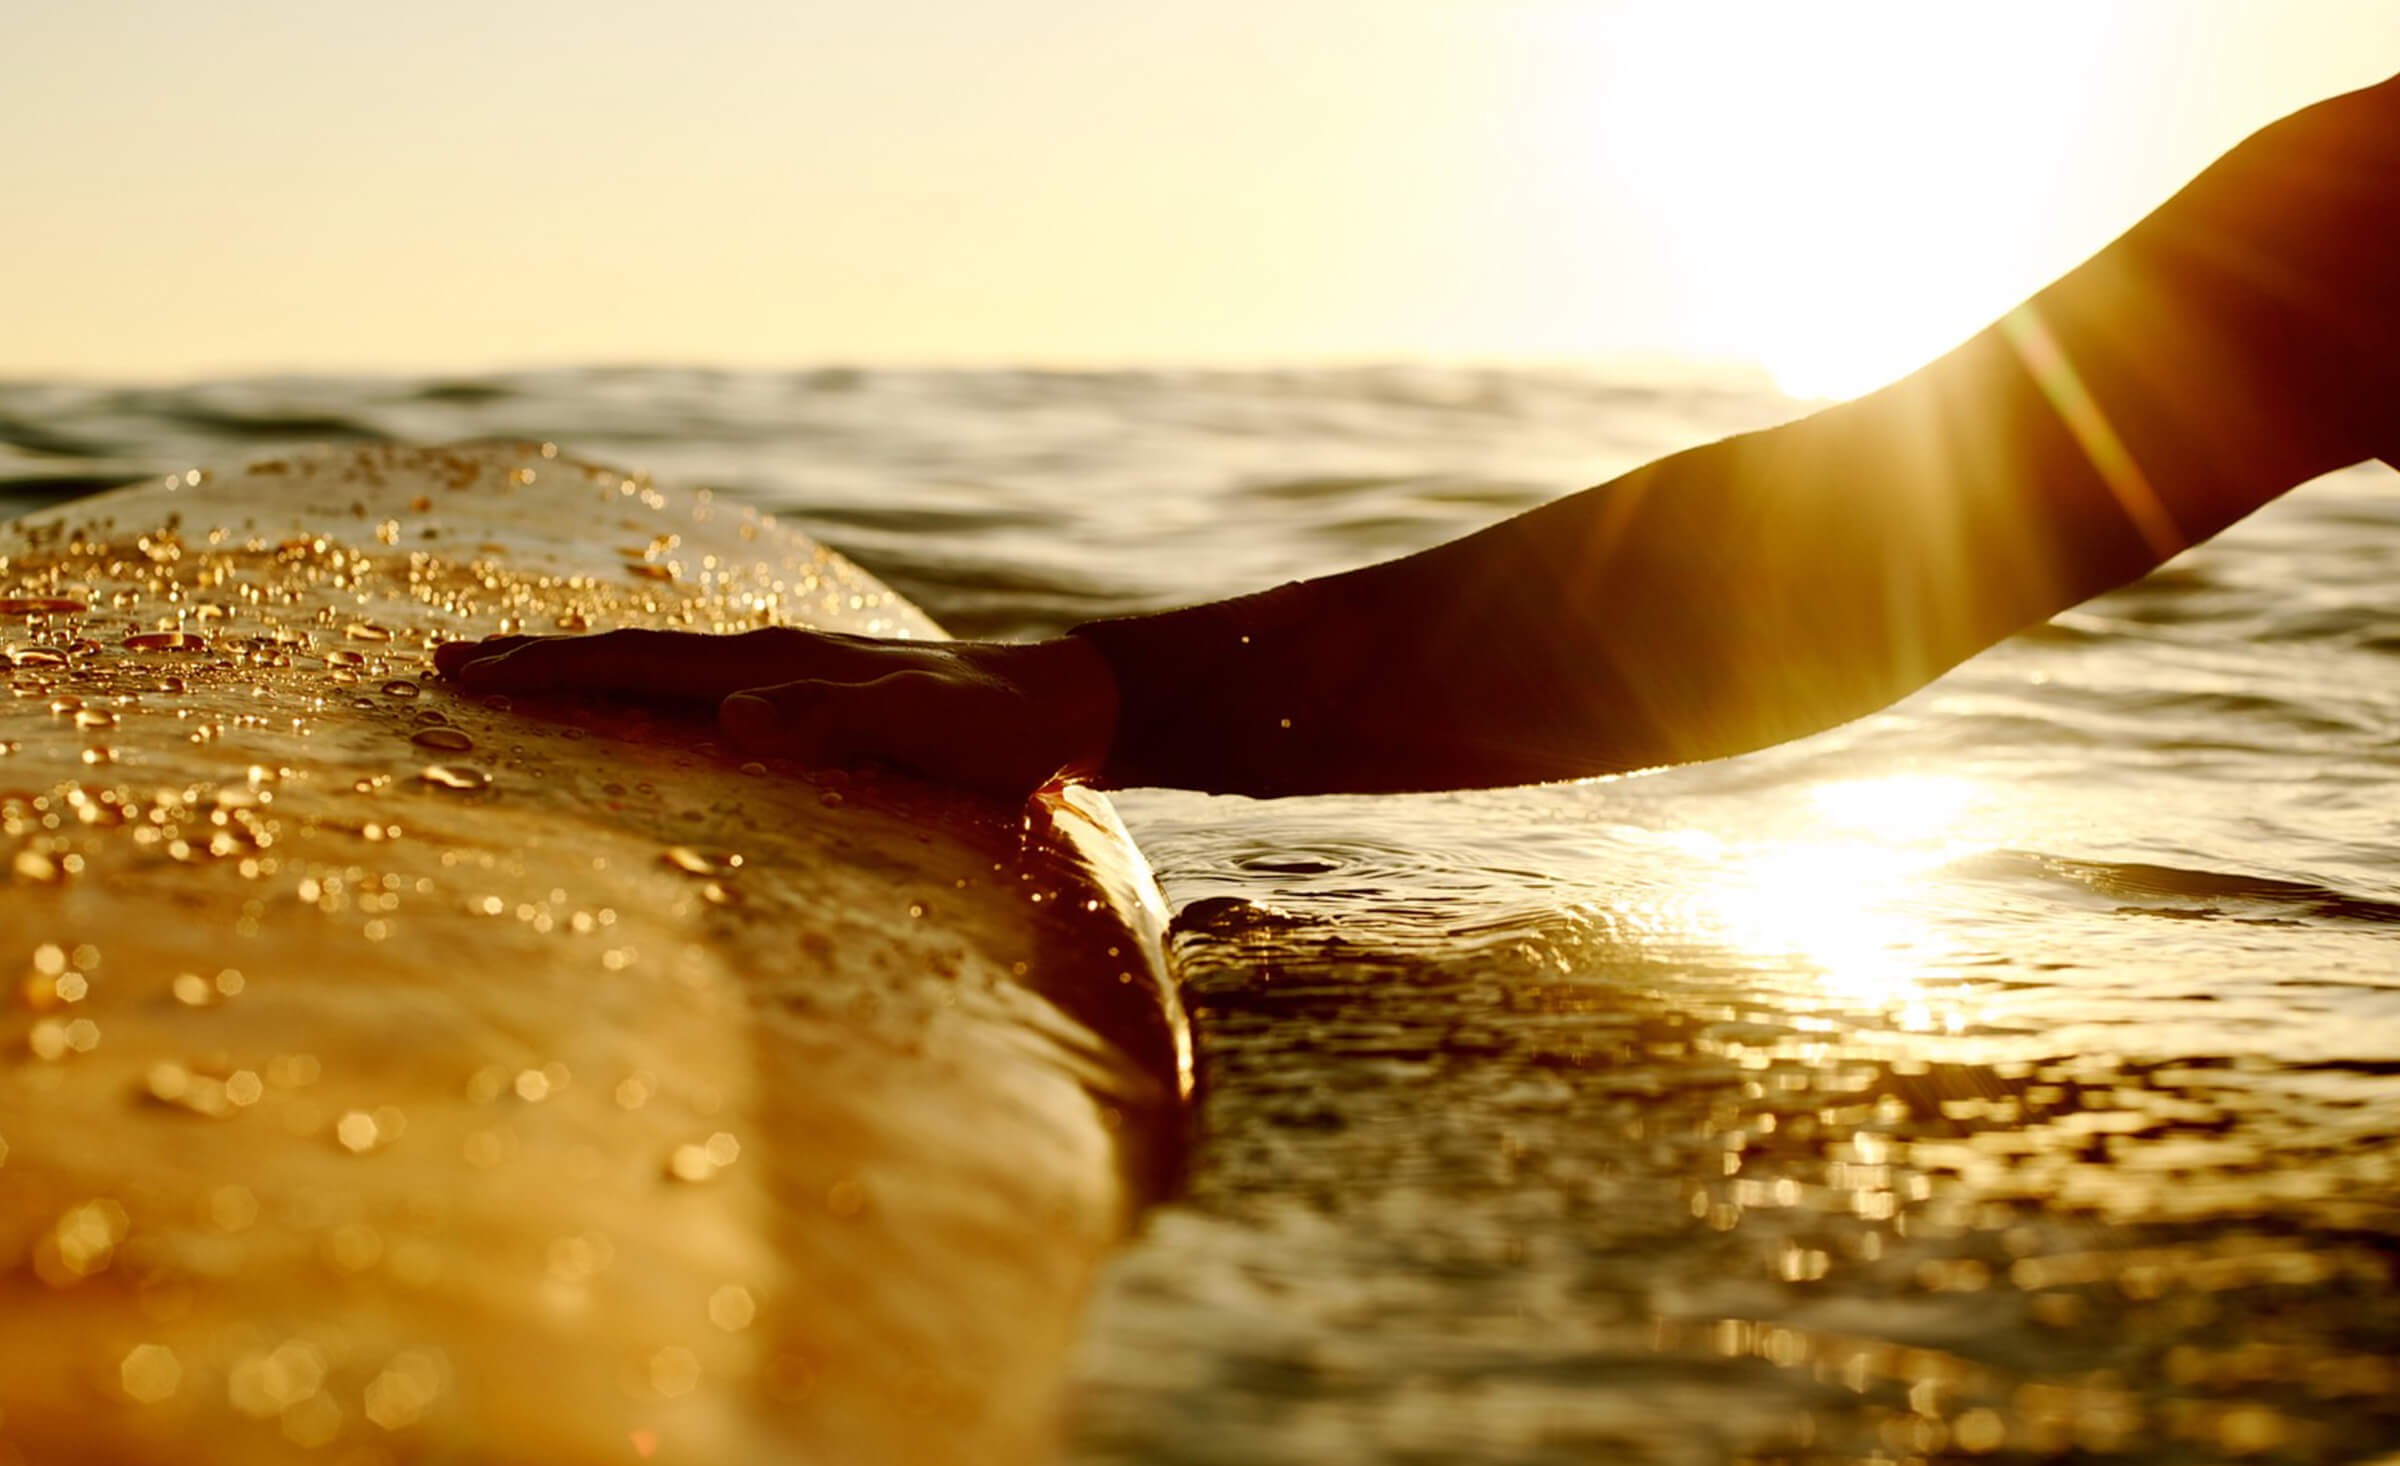 Hand reaches out to touch surfboard in ocean water with a rising sun in the background.